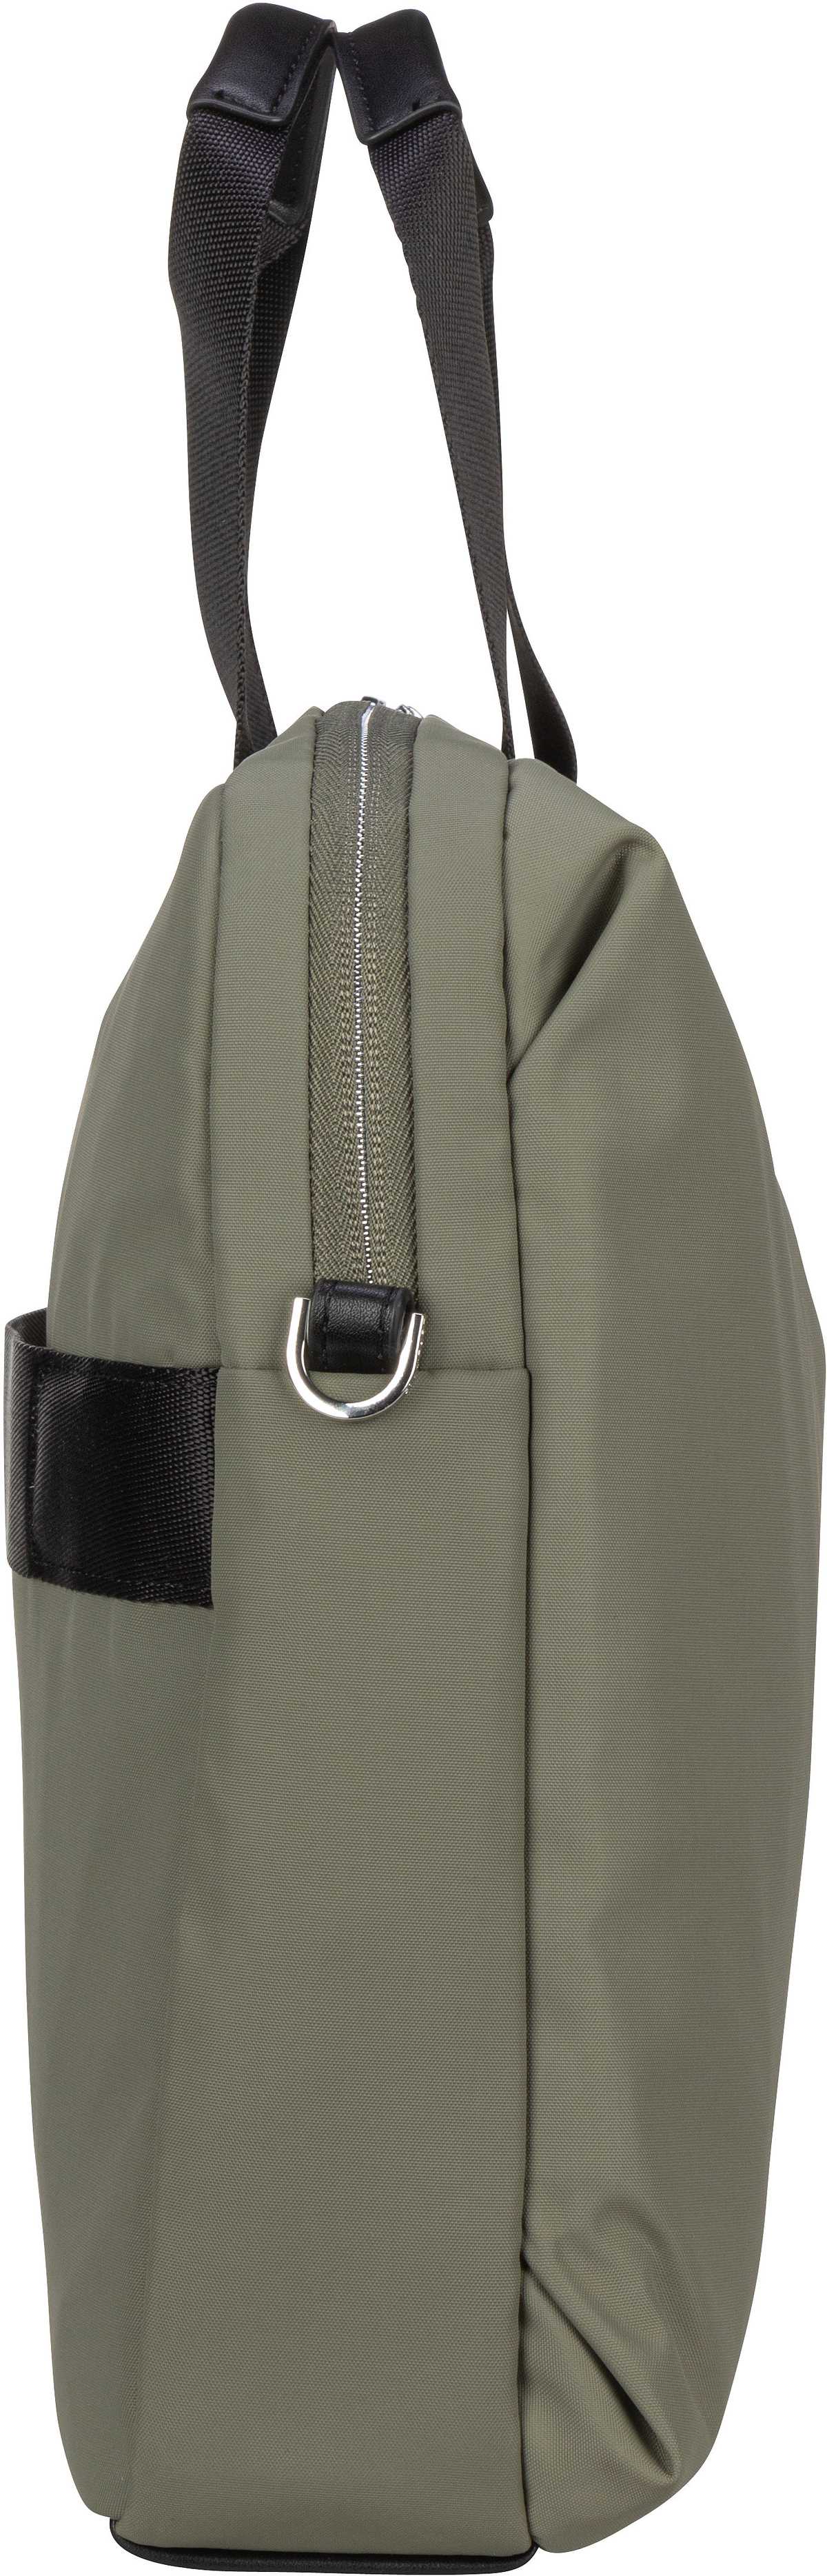 Samsonite Ongoing Bailhandle 15.6'' - Olive Green